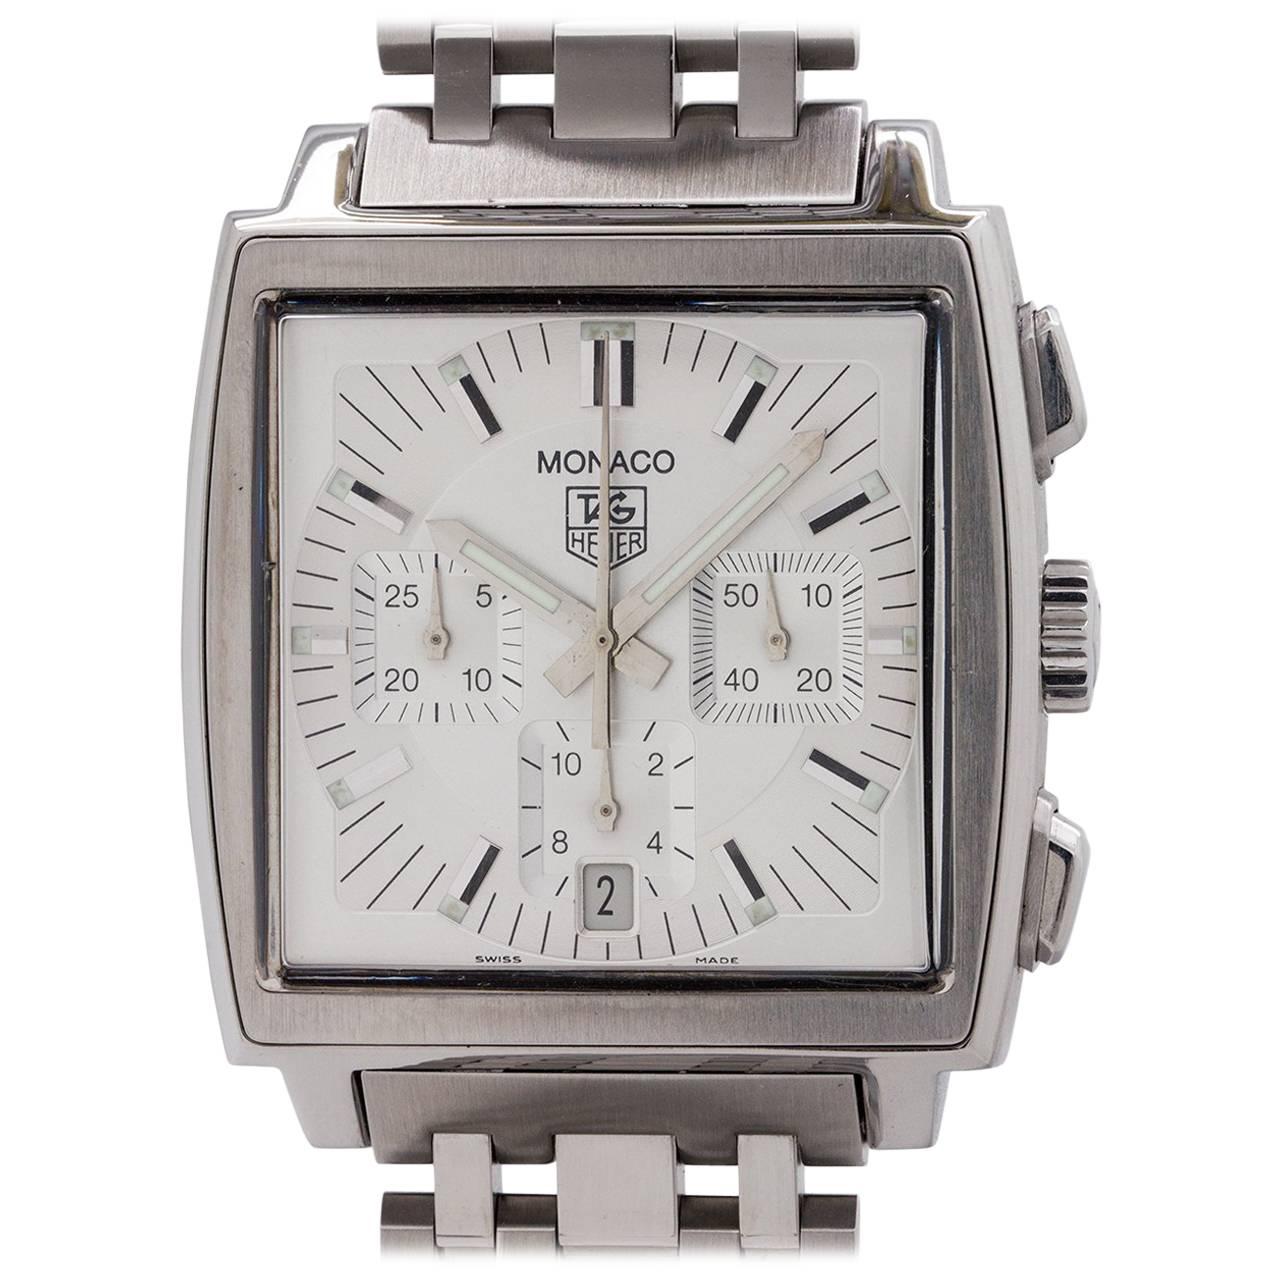 Tag Heuer Monaco Chronograph Re-Issue Reference CW2112 For Sale